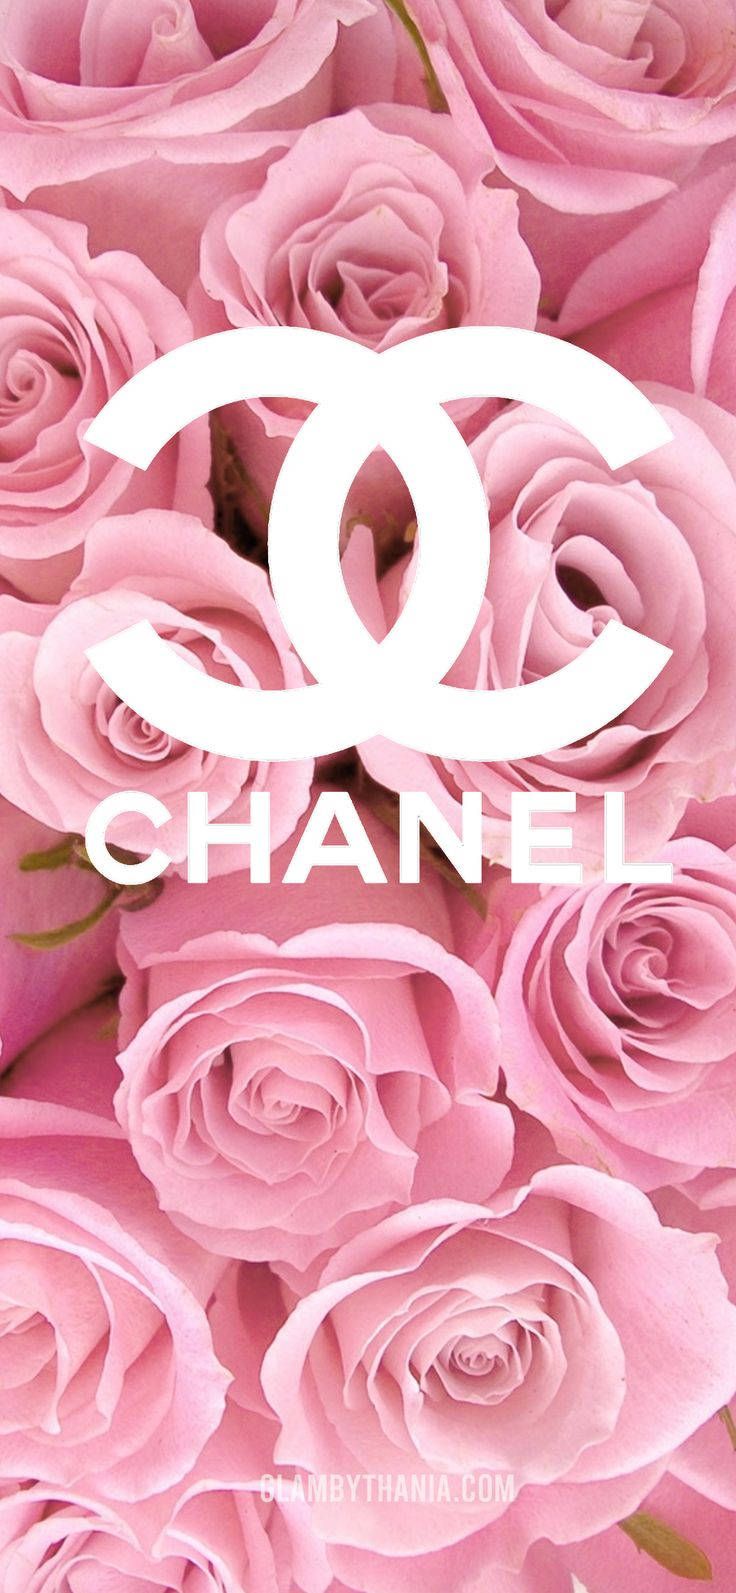 Download Chanel Roses Girly iPhone Wallpaper